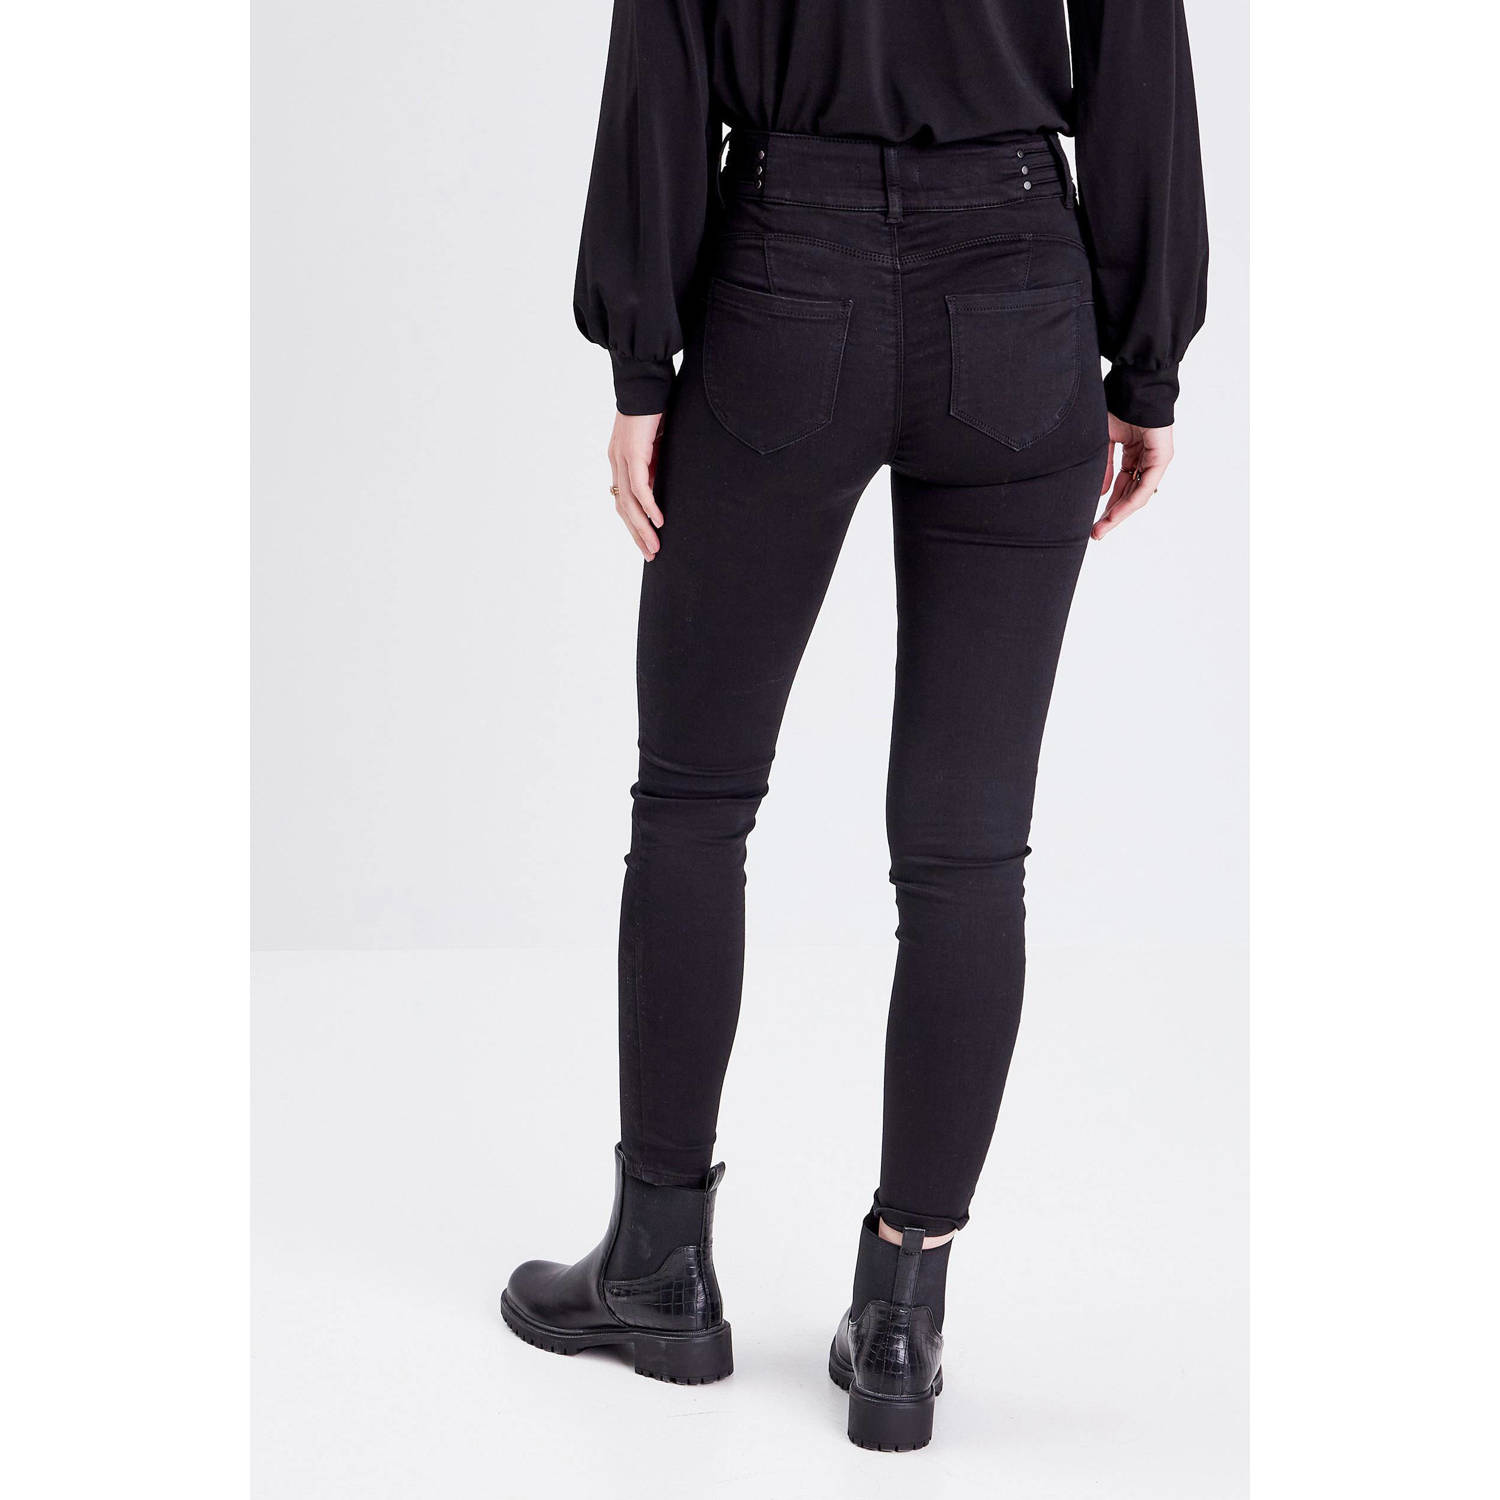 Cache cropped jeans black